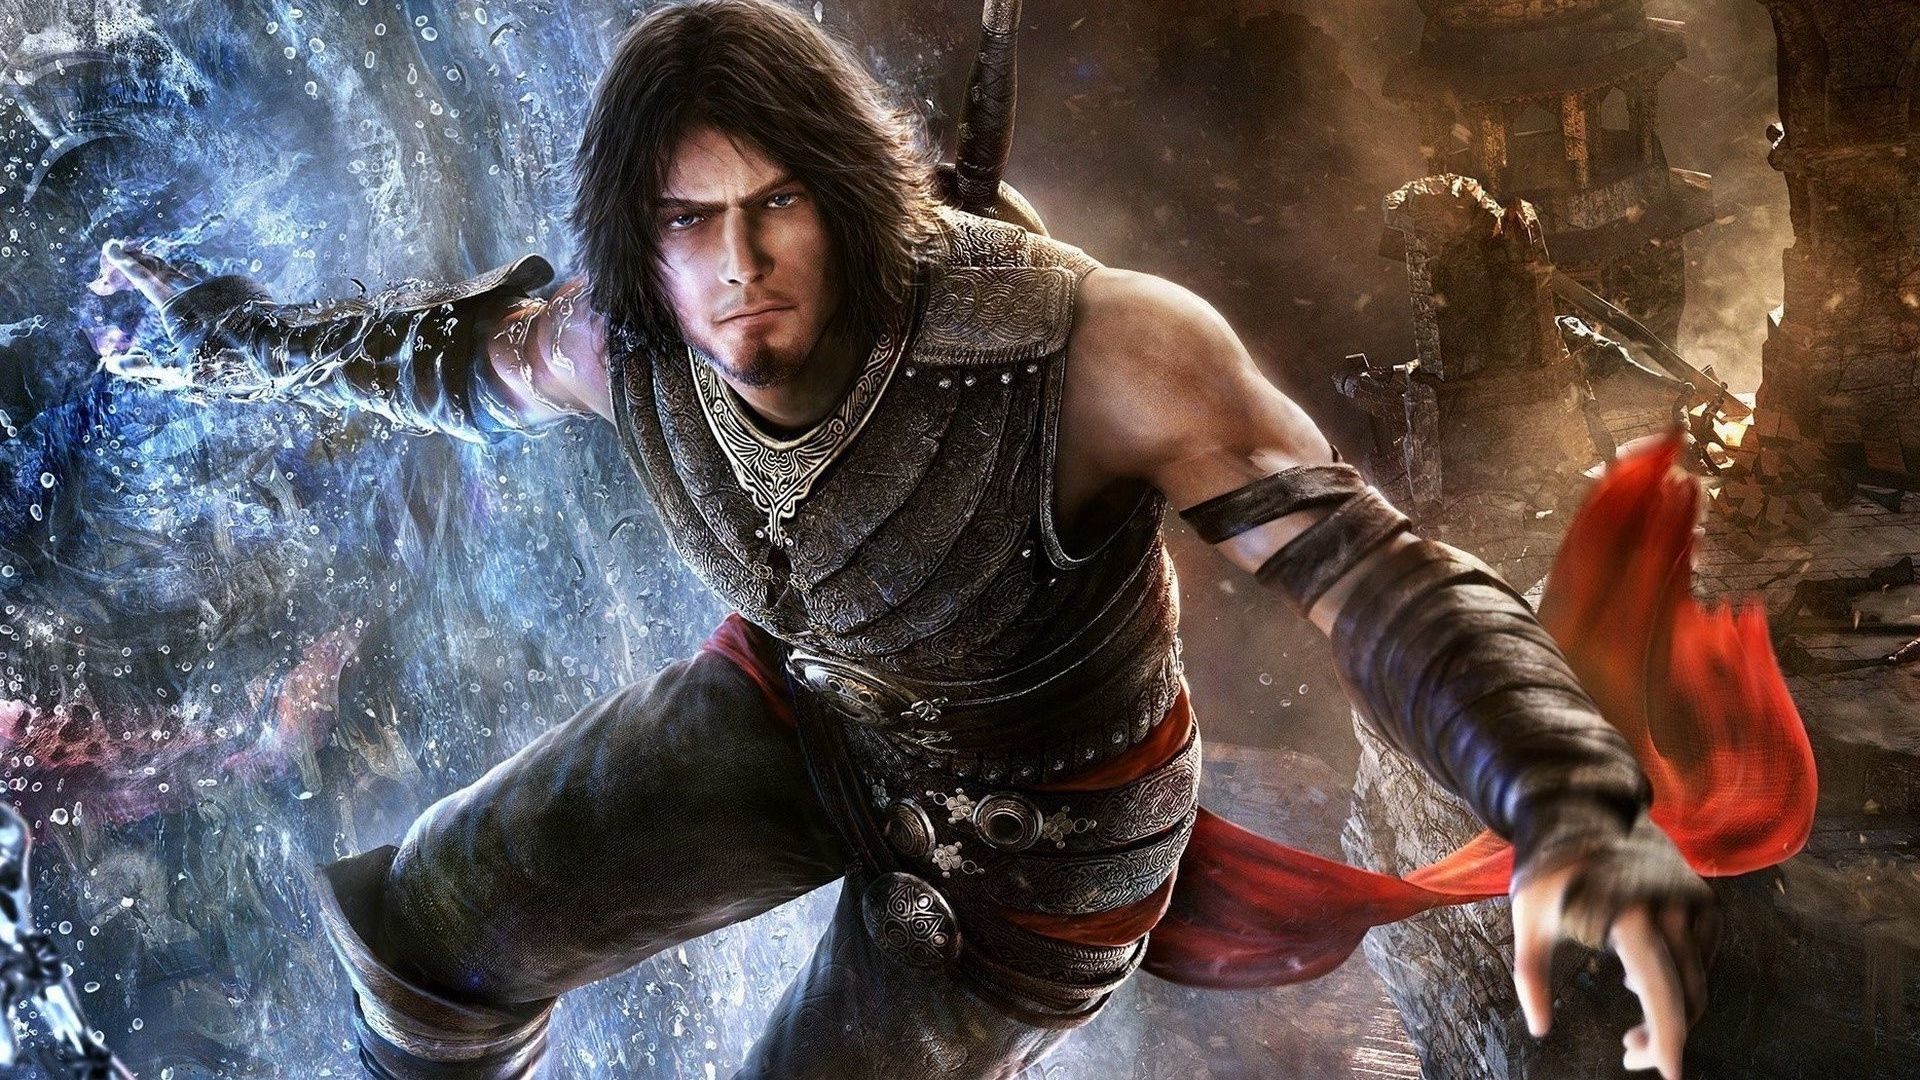 1920x1080 Prince And The Revolution Wallpaper Prince of persia the 